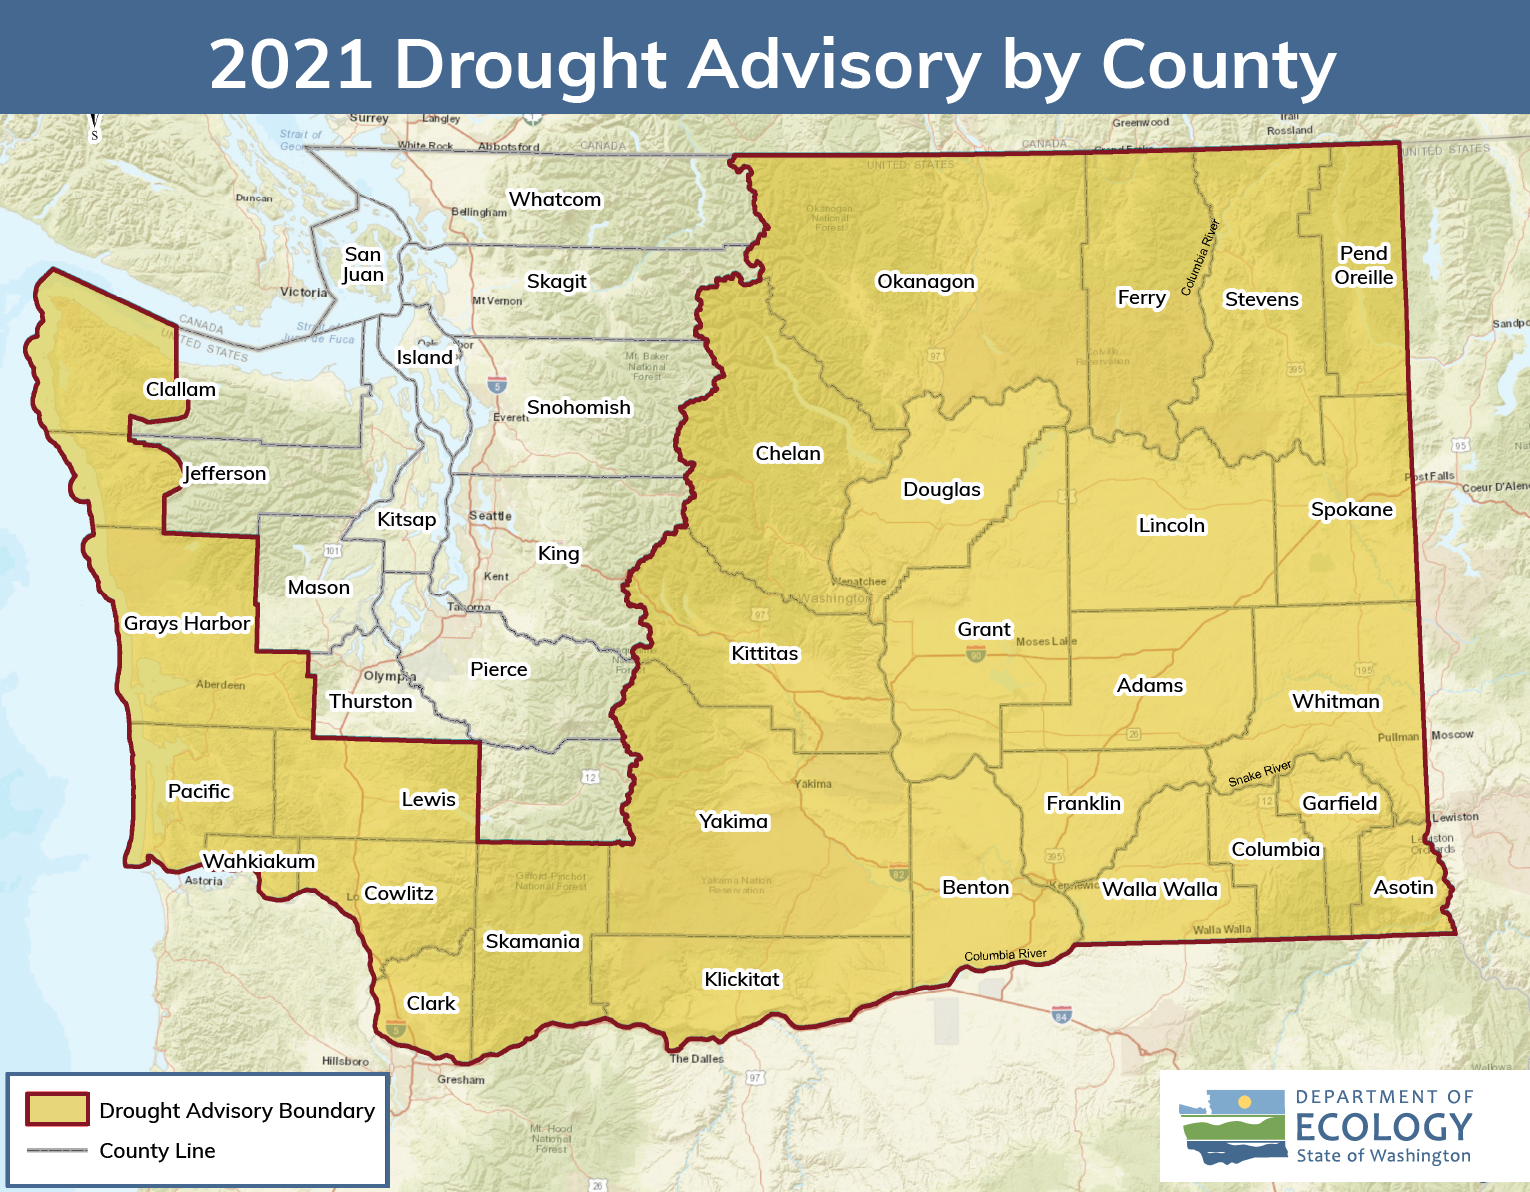 Map of Washington state showing that most of the counties not adjacent to Puget Sound fall under drought advisory